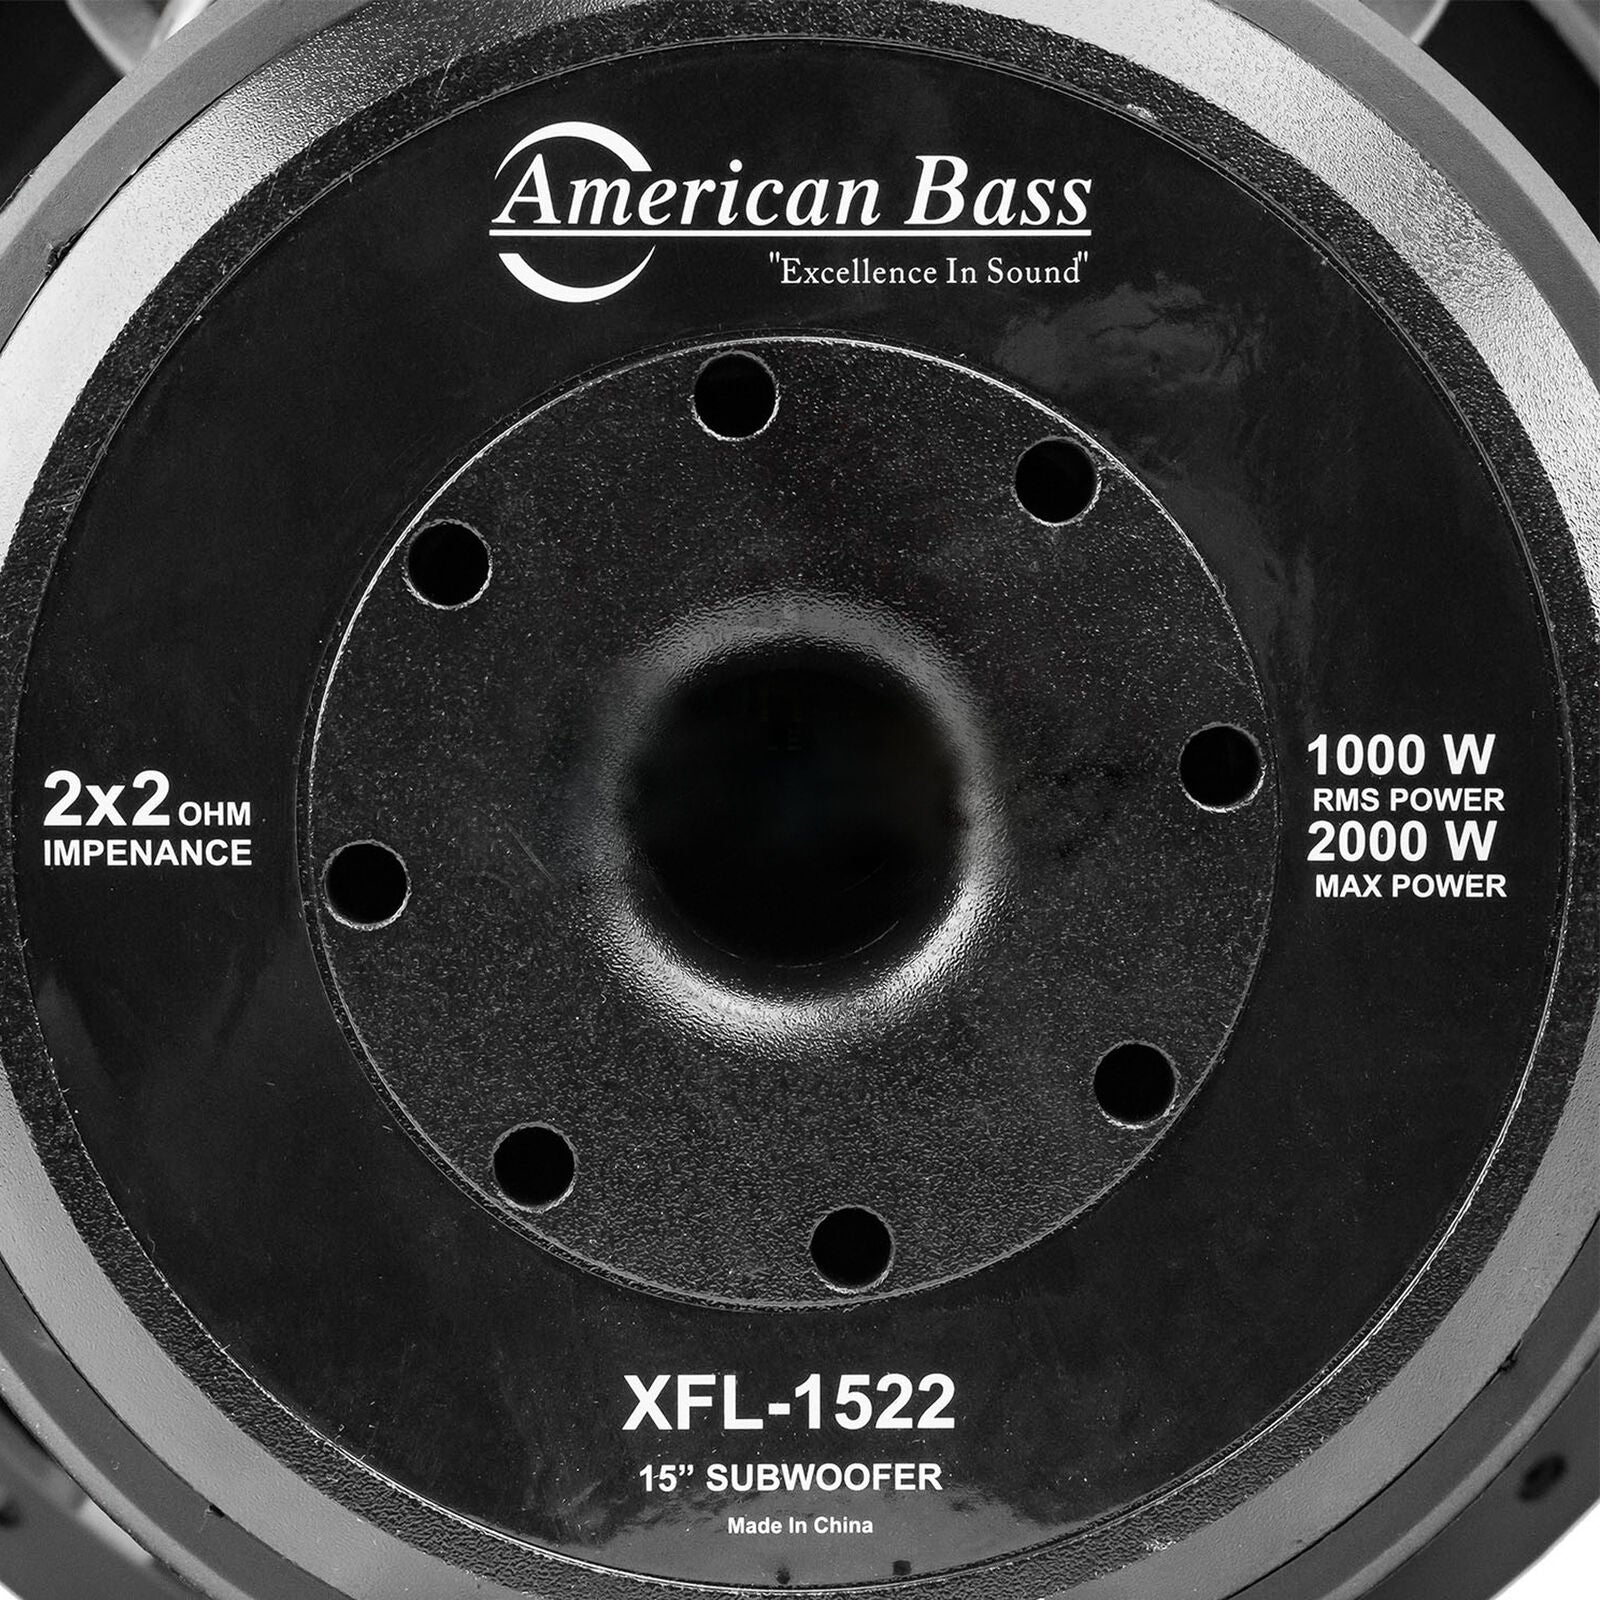 American Bass 15" Subwoofer 2000W 3" 2 Ohm DVC Pro Car Audio XFL-15-D2 New - image 2 of 4